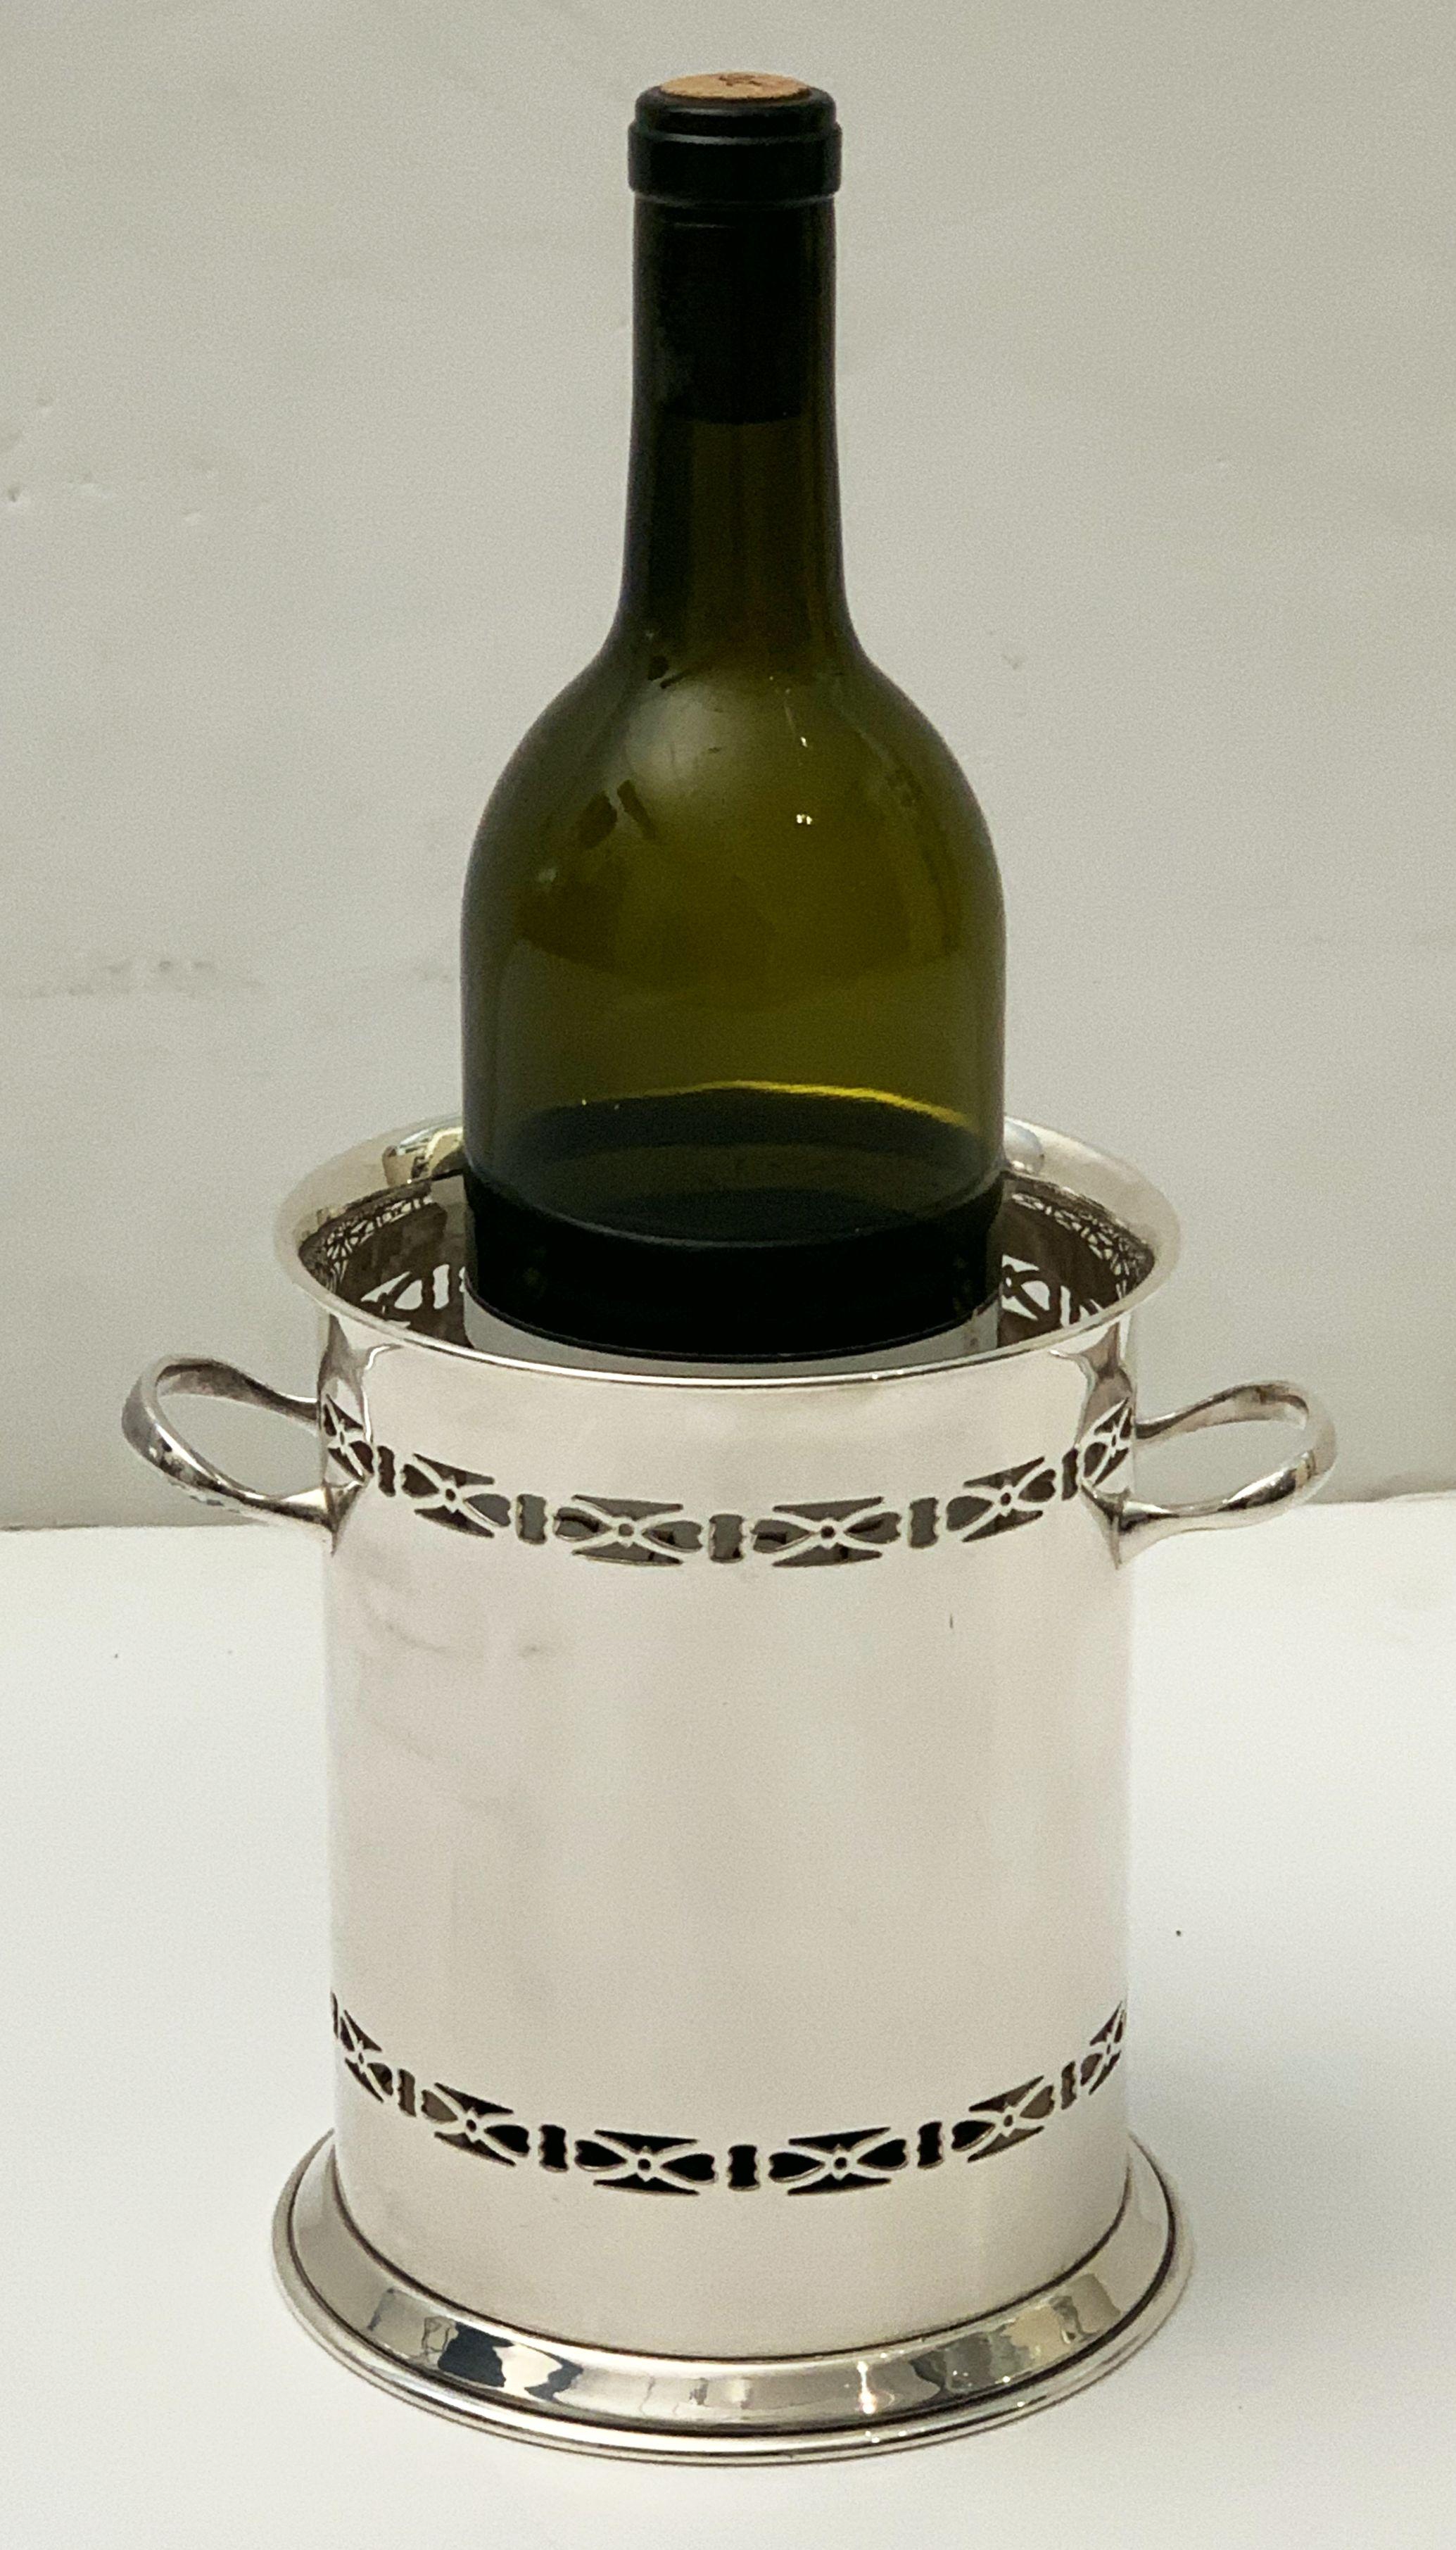 A handsome English wine bottle display holder or coaster of fine plate silver, featuring a pierced design around the circumference and opposing handles.

Designed to add a fine level of elegance to the presentation of wine at the table.